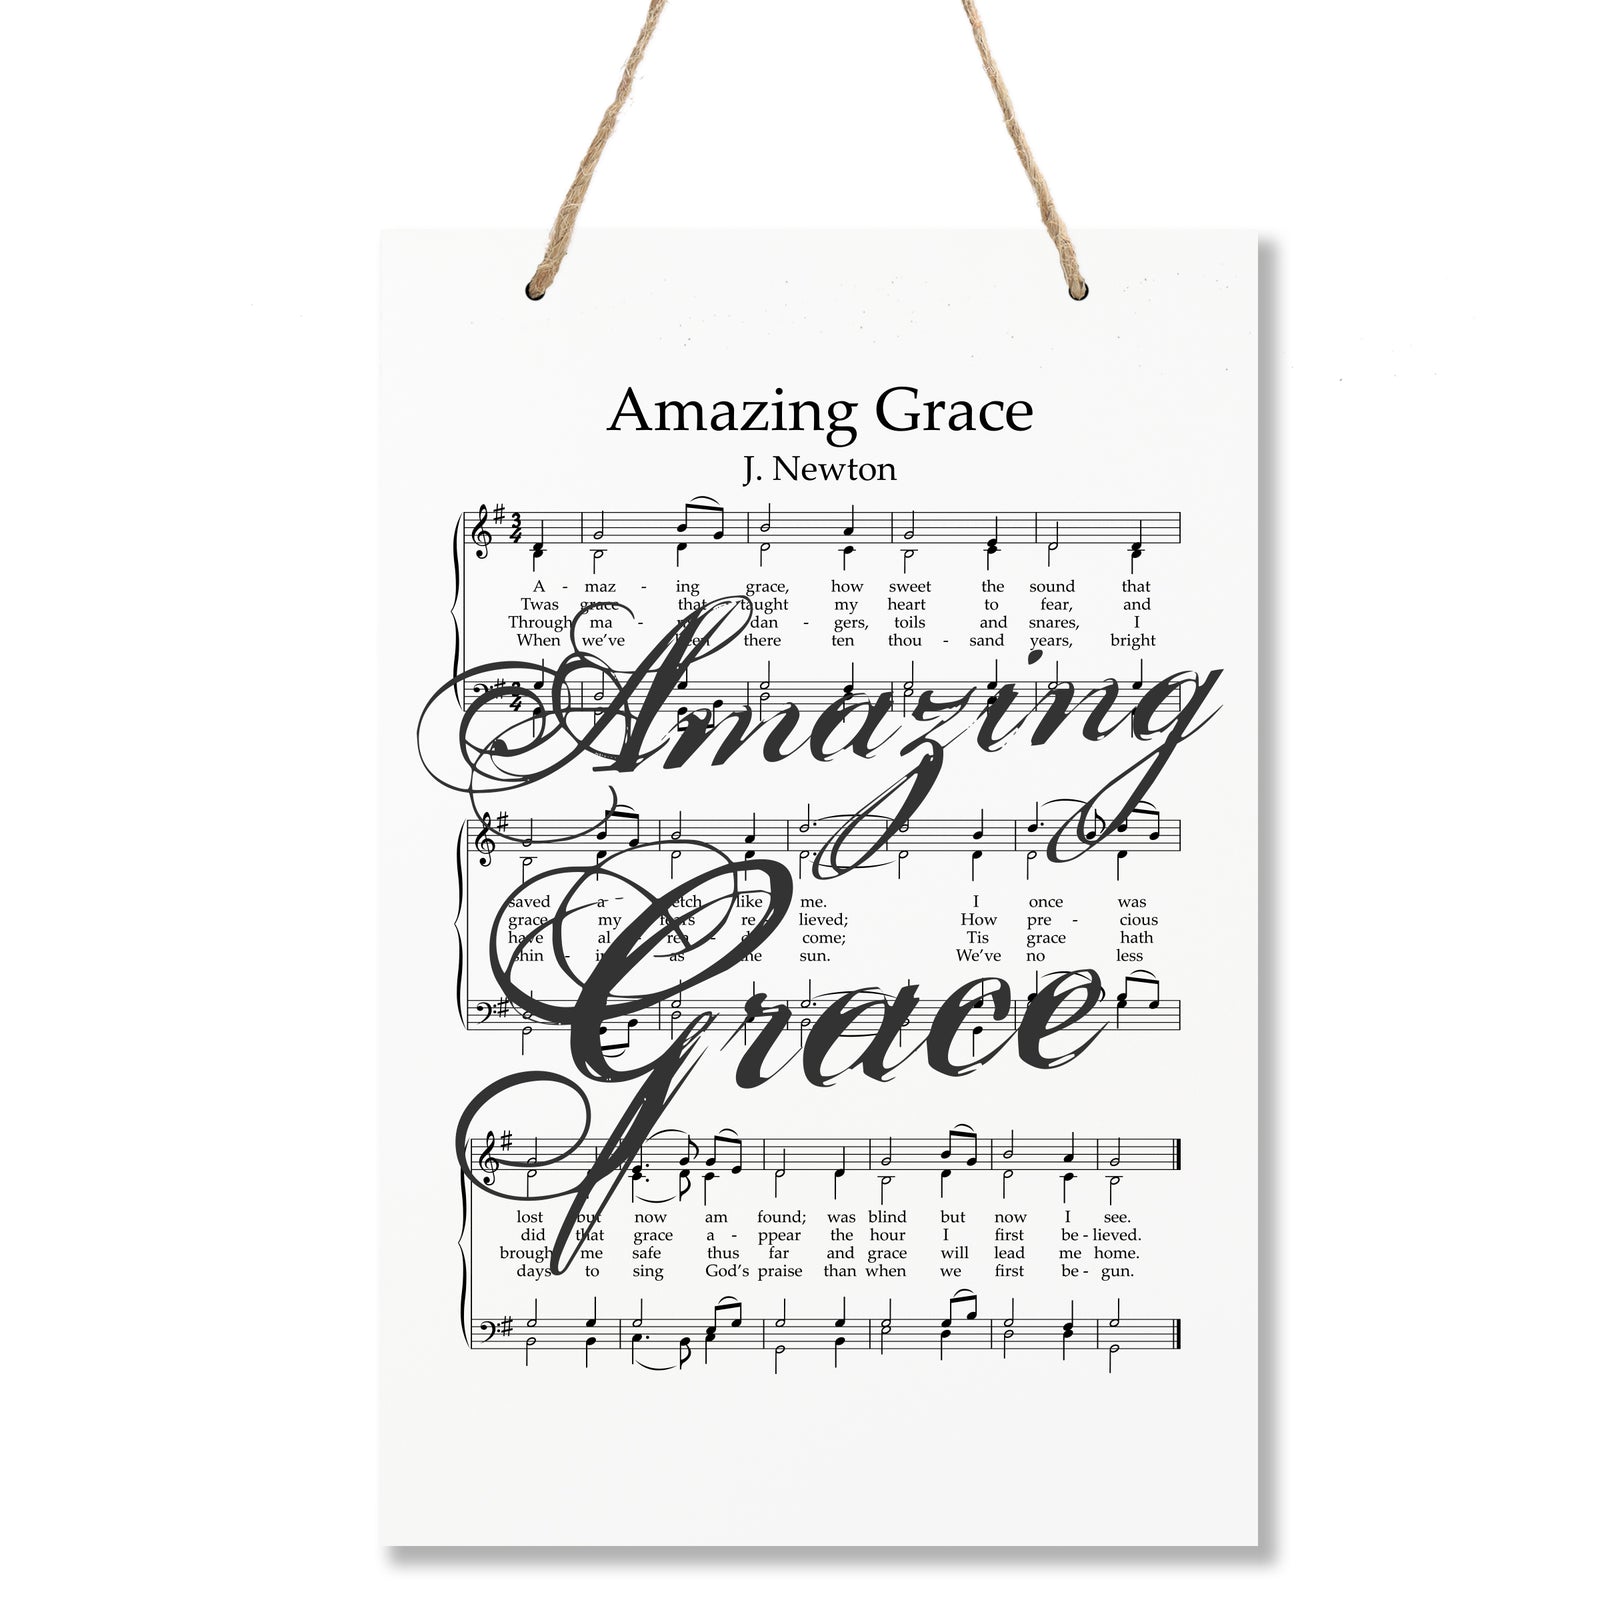 Lifesong Milestones Sheet Music Wall Art Plaque Gifts With Hymn and Song Lyrics -  8” x 12” Wooden Hanging Rope Sign